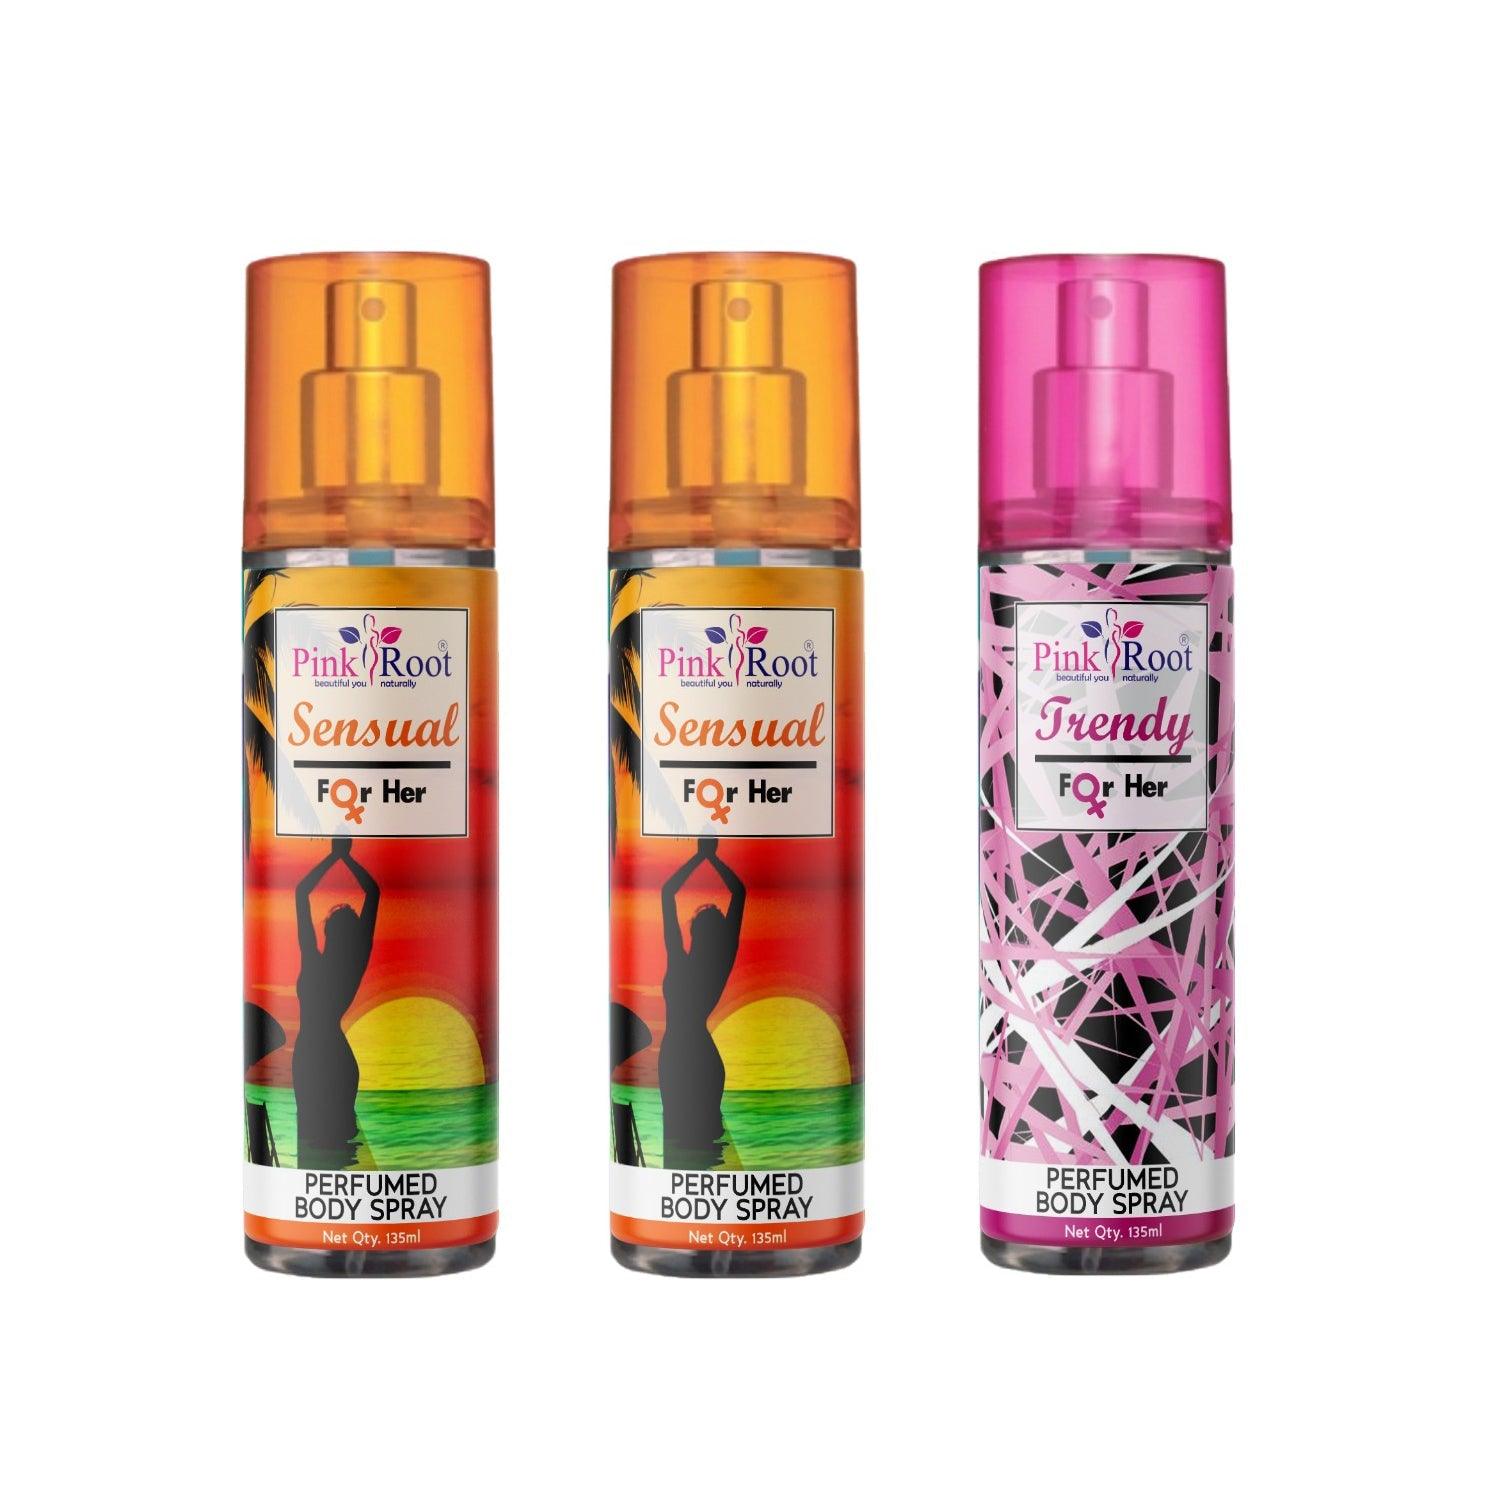 Sensual & Trendy Perfumed Body Spray for Women, Pack of 3 - Pink Root